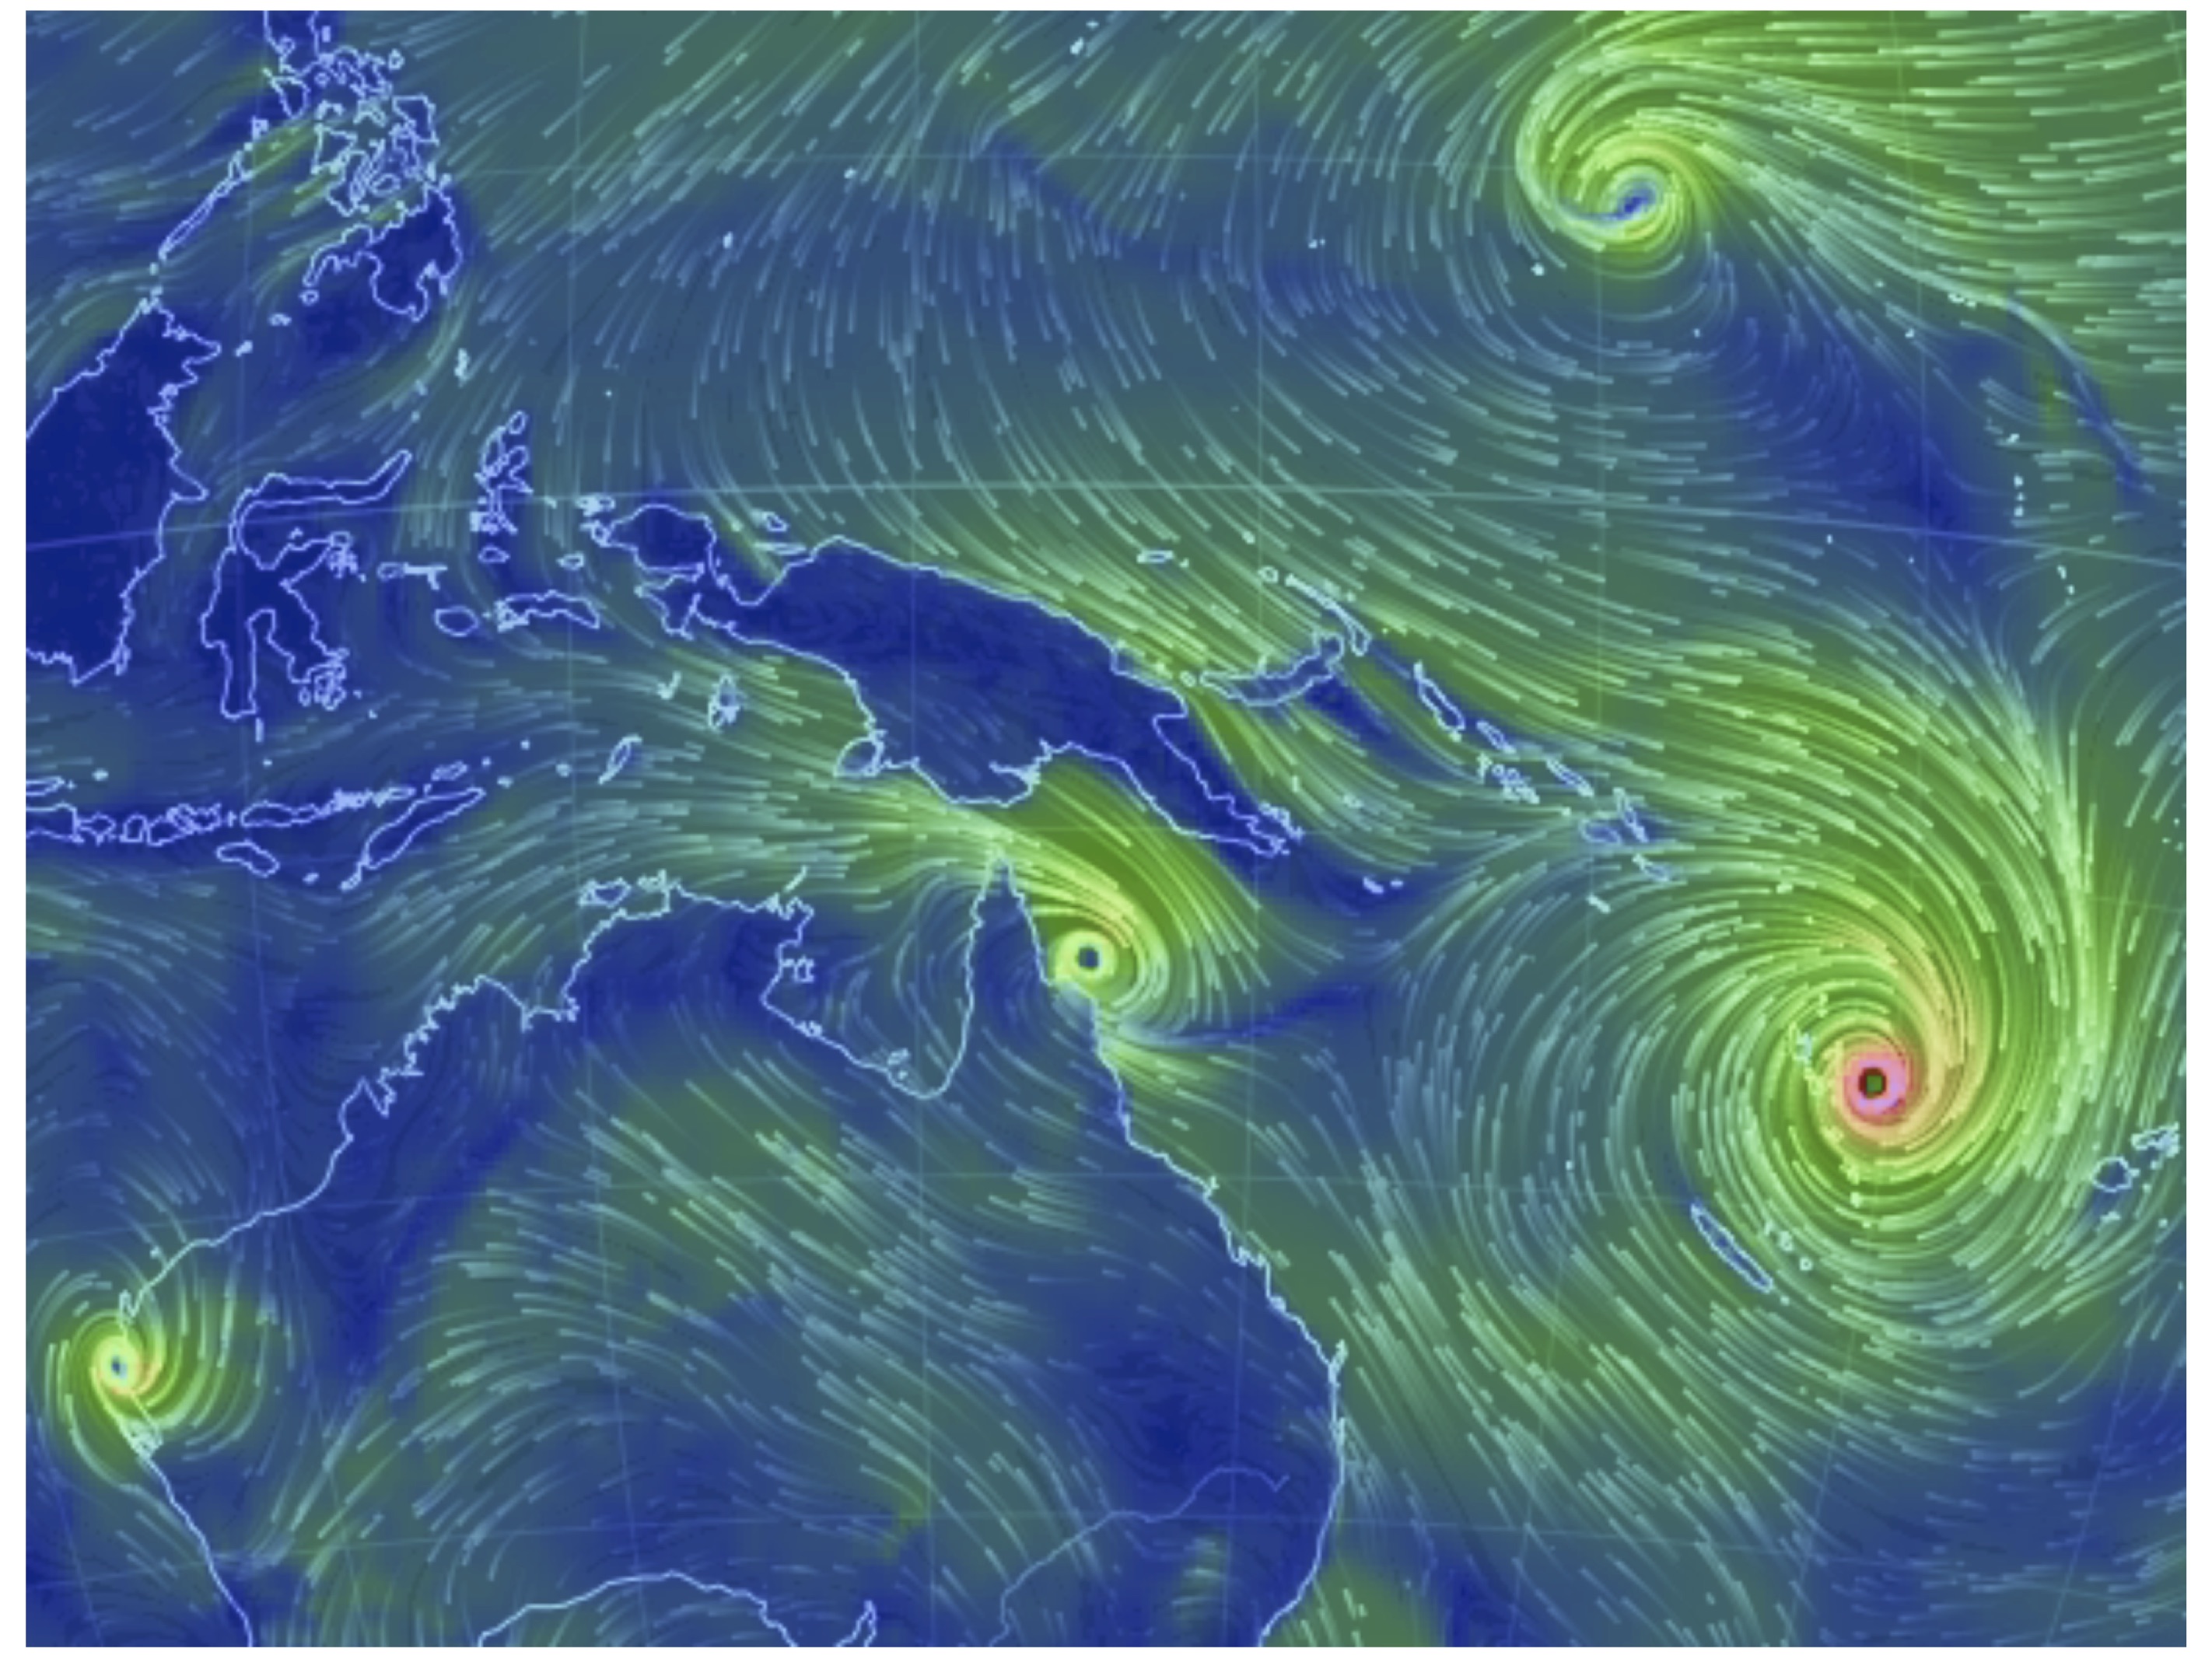 Four active tropical cyclones are visible in this atmospheric circulation map provided by the Earth Wind Map project. source: http://earth.nullschool.net/.